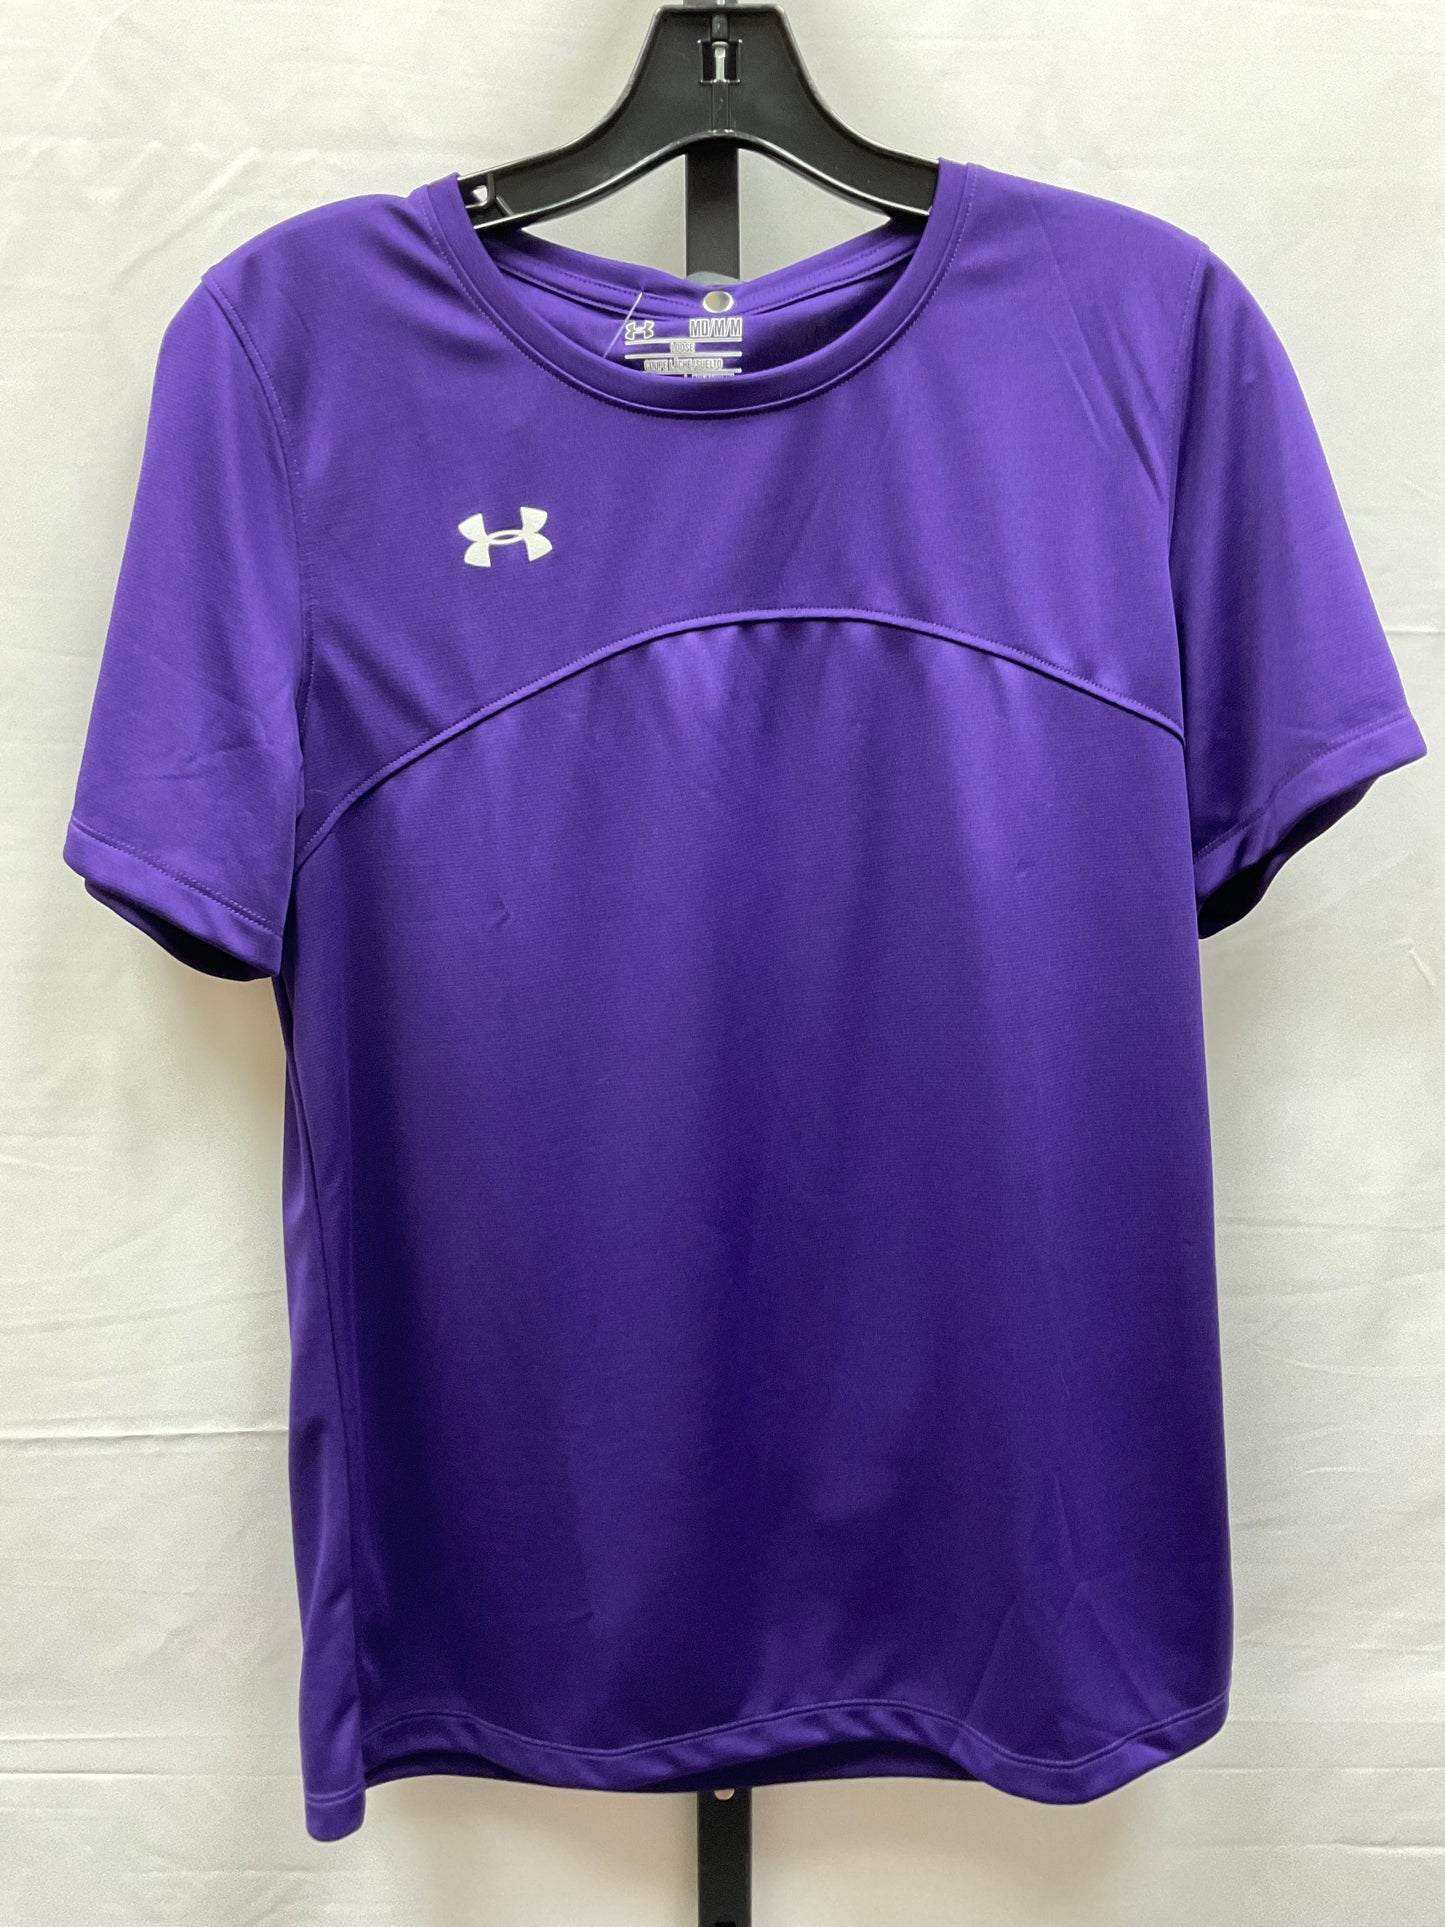 Purple Athletic Top Short Sleeve Under Armour, Size M